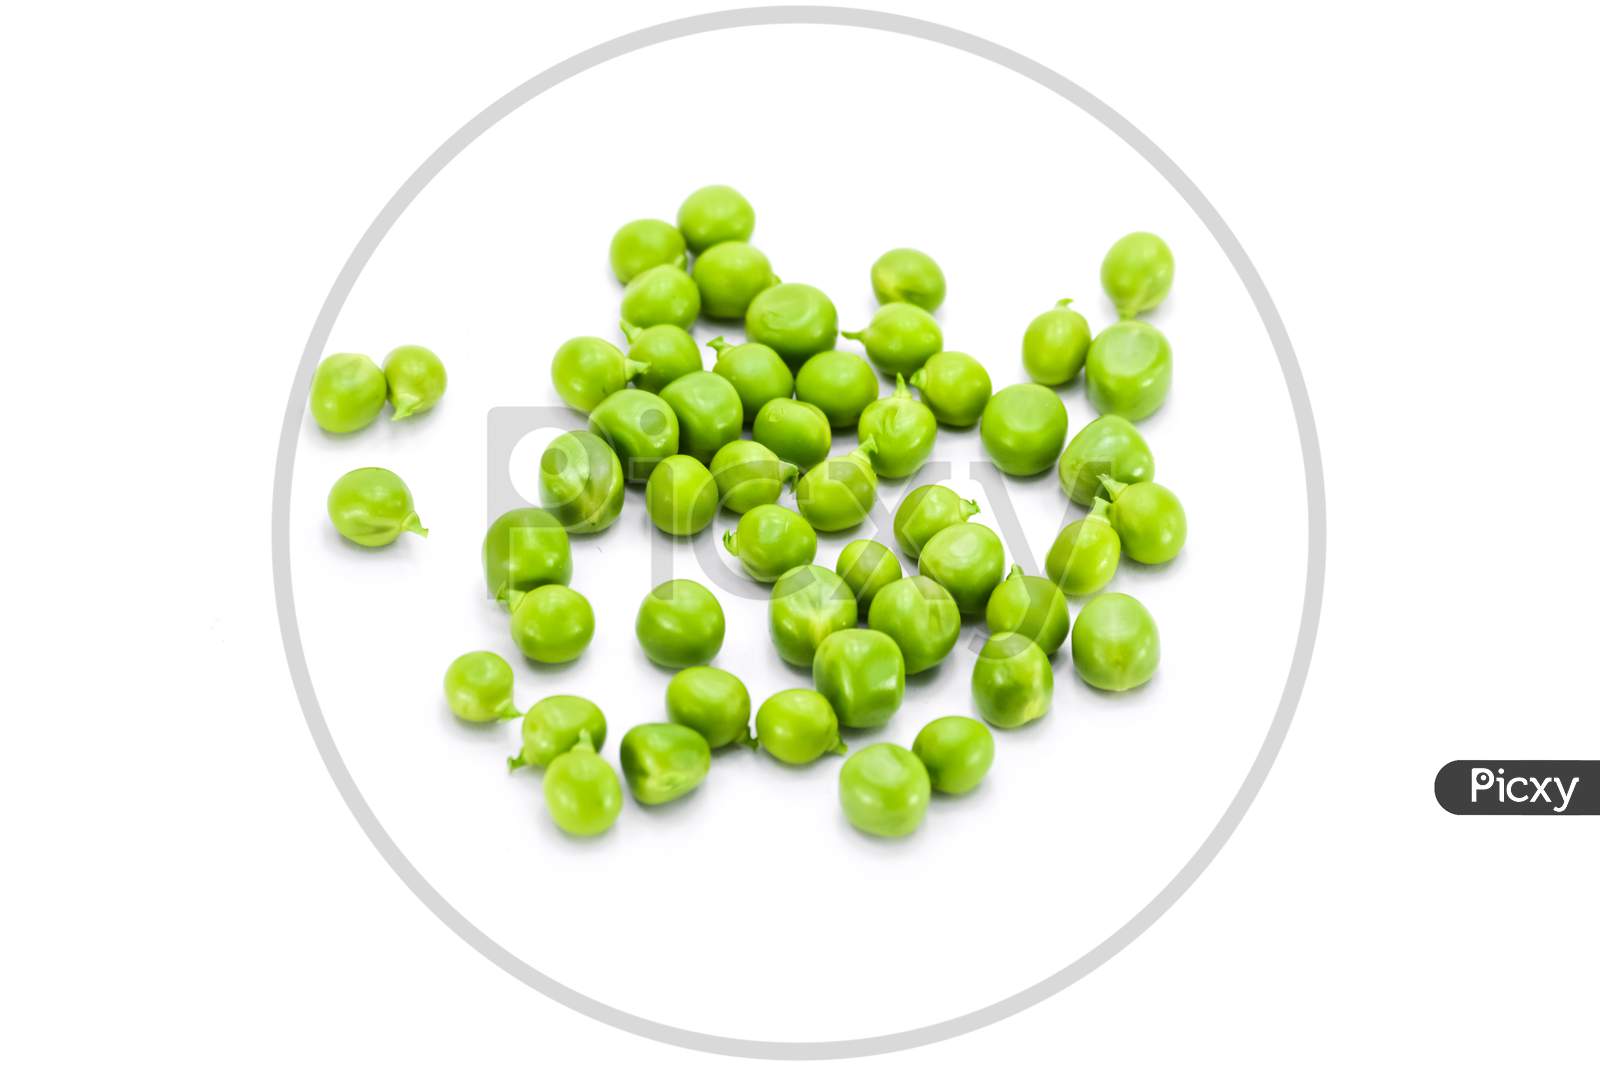 Fresh green peas isolated on a white background